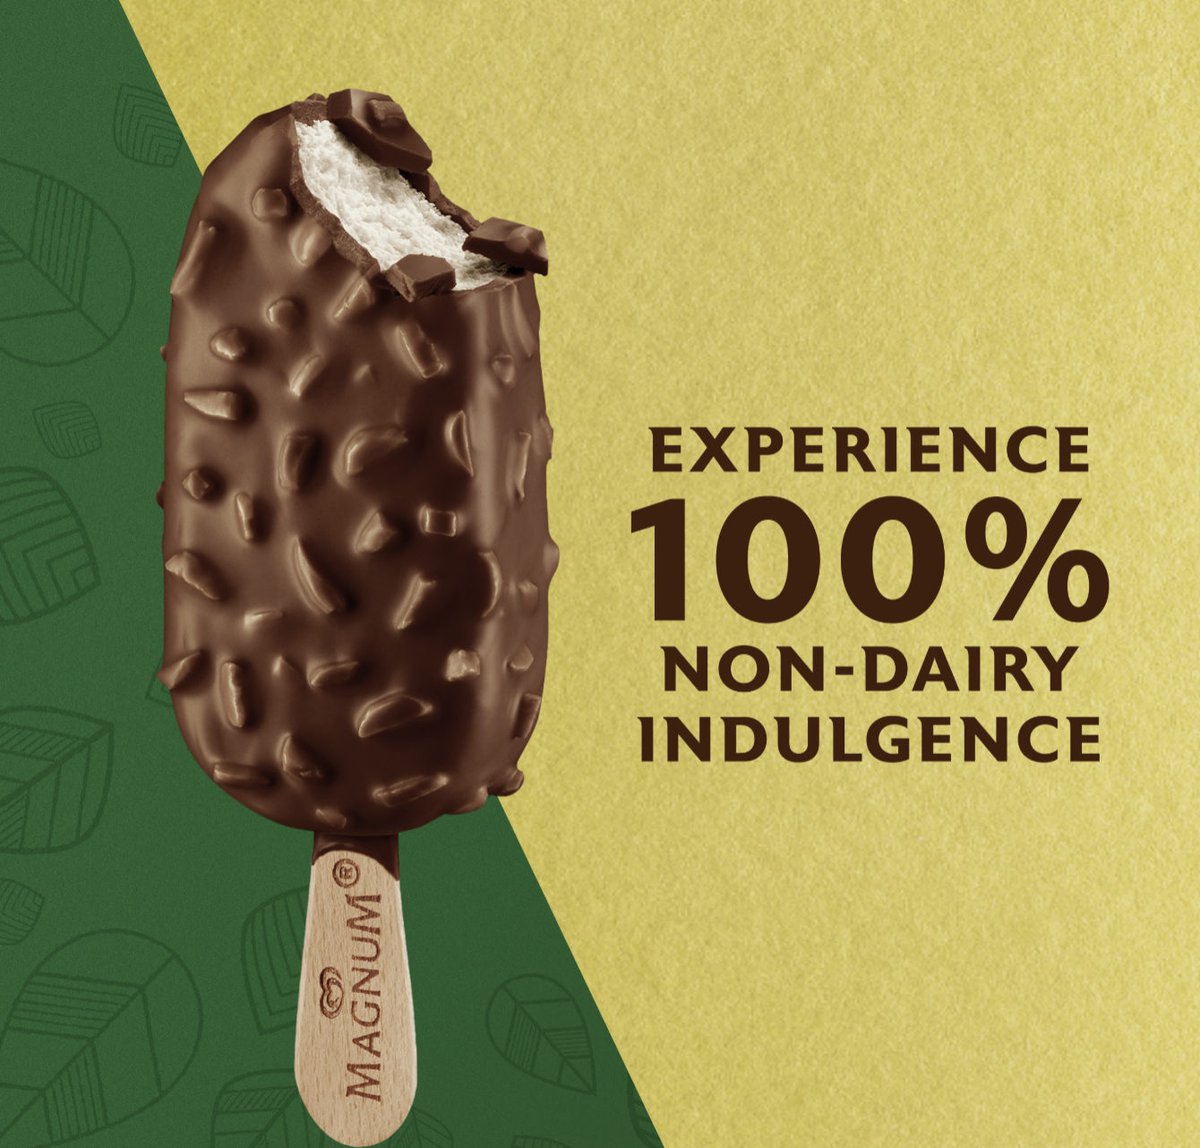 100% sweet indulgence without any of the dairy! 🍨 🍫 💫 ​ What's your favorite way to indulge in Magnum Non-Dairy bars? Let us know in the comments. 👇